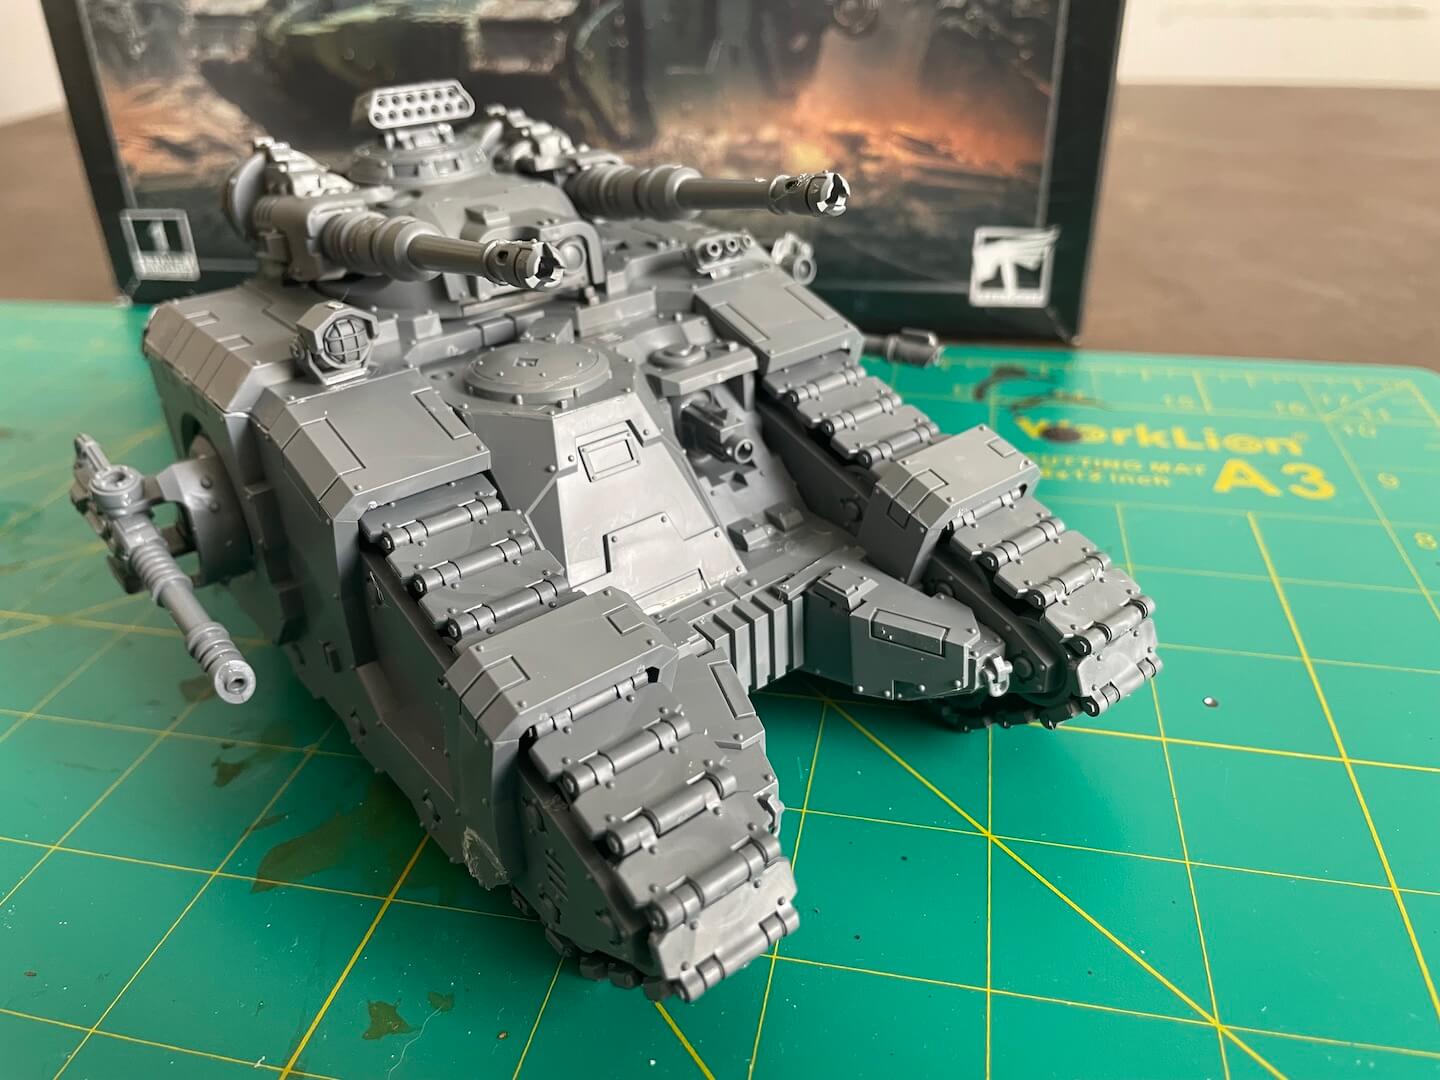 The Warhammer Horus Heresy Sicaran Battle Tank Facing to the right, with all cannons ready to fire